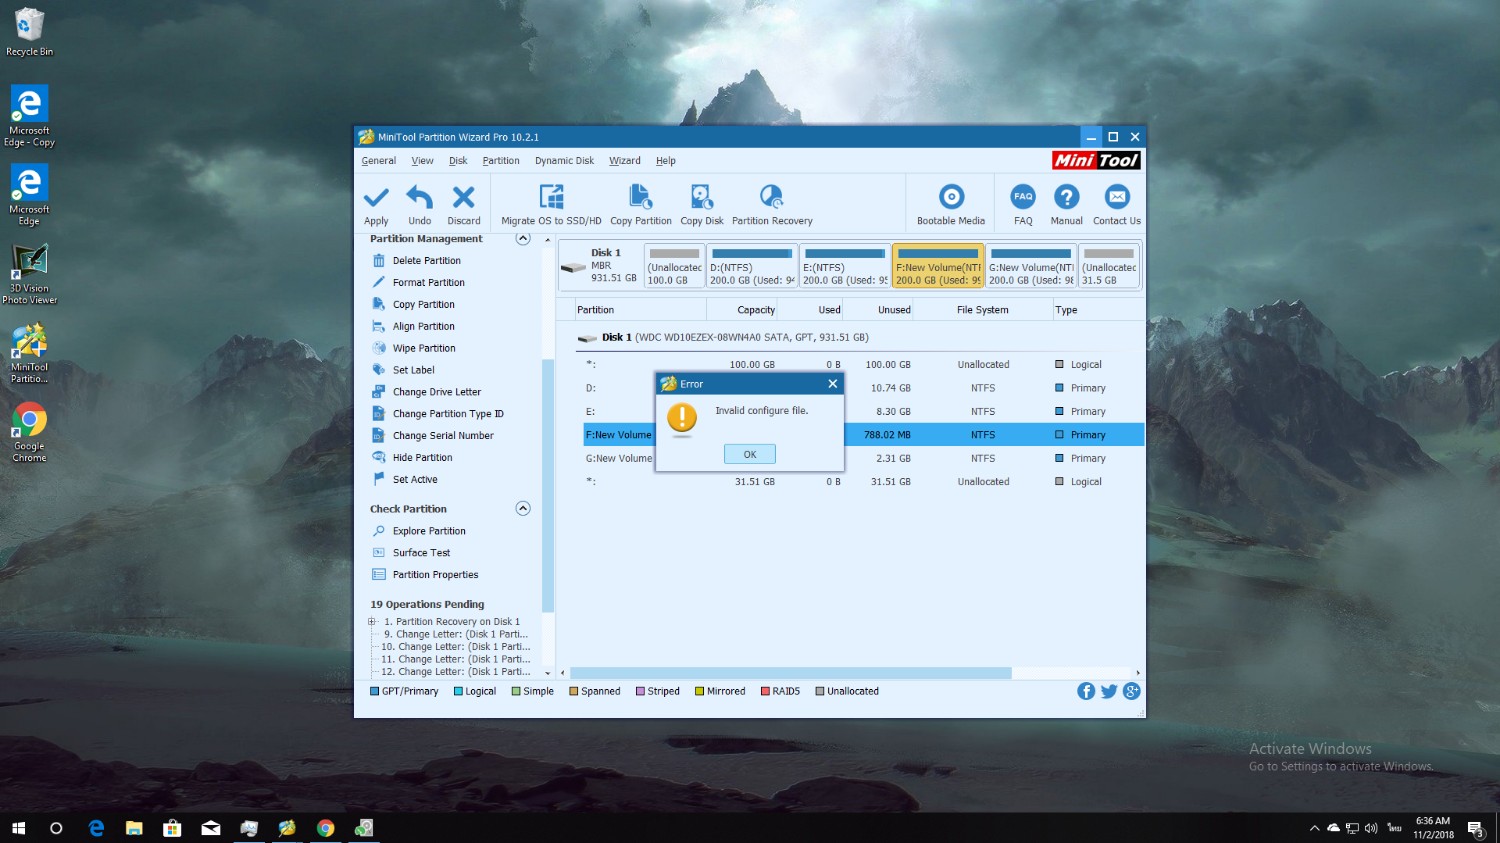 minitool partition wizard 12.3 download